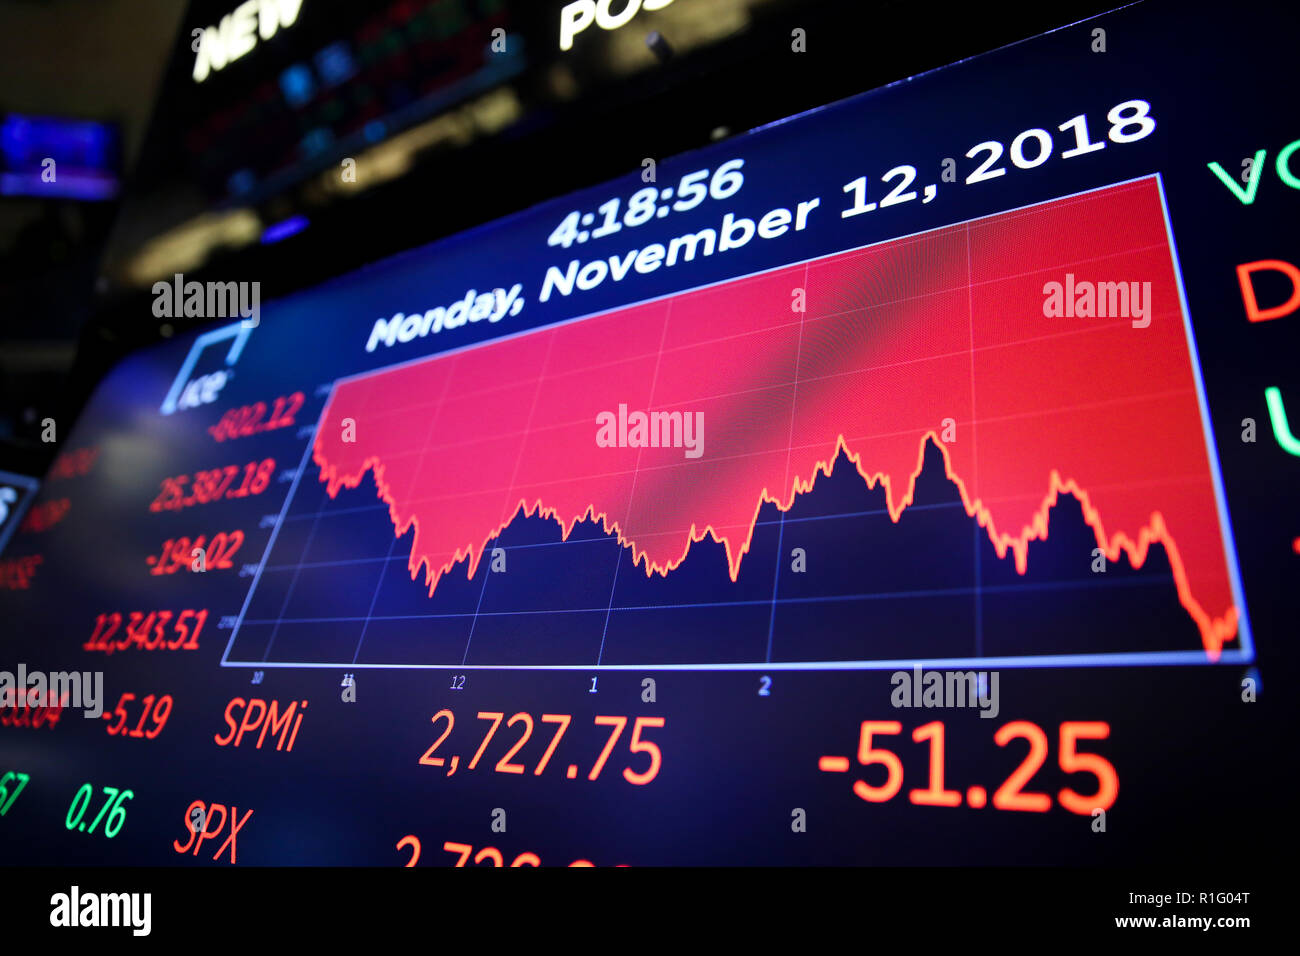 New York, USA. 12th Nov, 2018. Electronic screen shows the closing numbers of stock market at the New York Stock Exchange in New York, the United States, Nov. 12, 2018. U.S. stocks closed sharply lower on Monday, as steep losses in Apple shares led the tech rout, dragging the market. The Dow Jones Industrial Average slumped 602.12 points, or 2.32 percent, to 25,387.18. Credit: Wang Ying/Xinhua/Alamy Live News Stock Photo